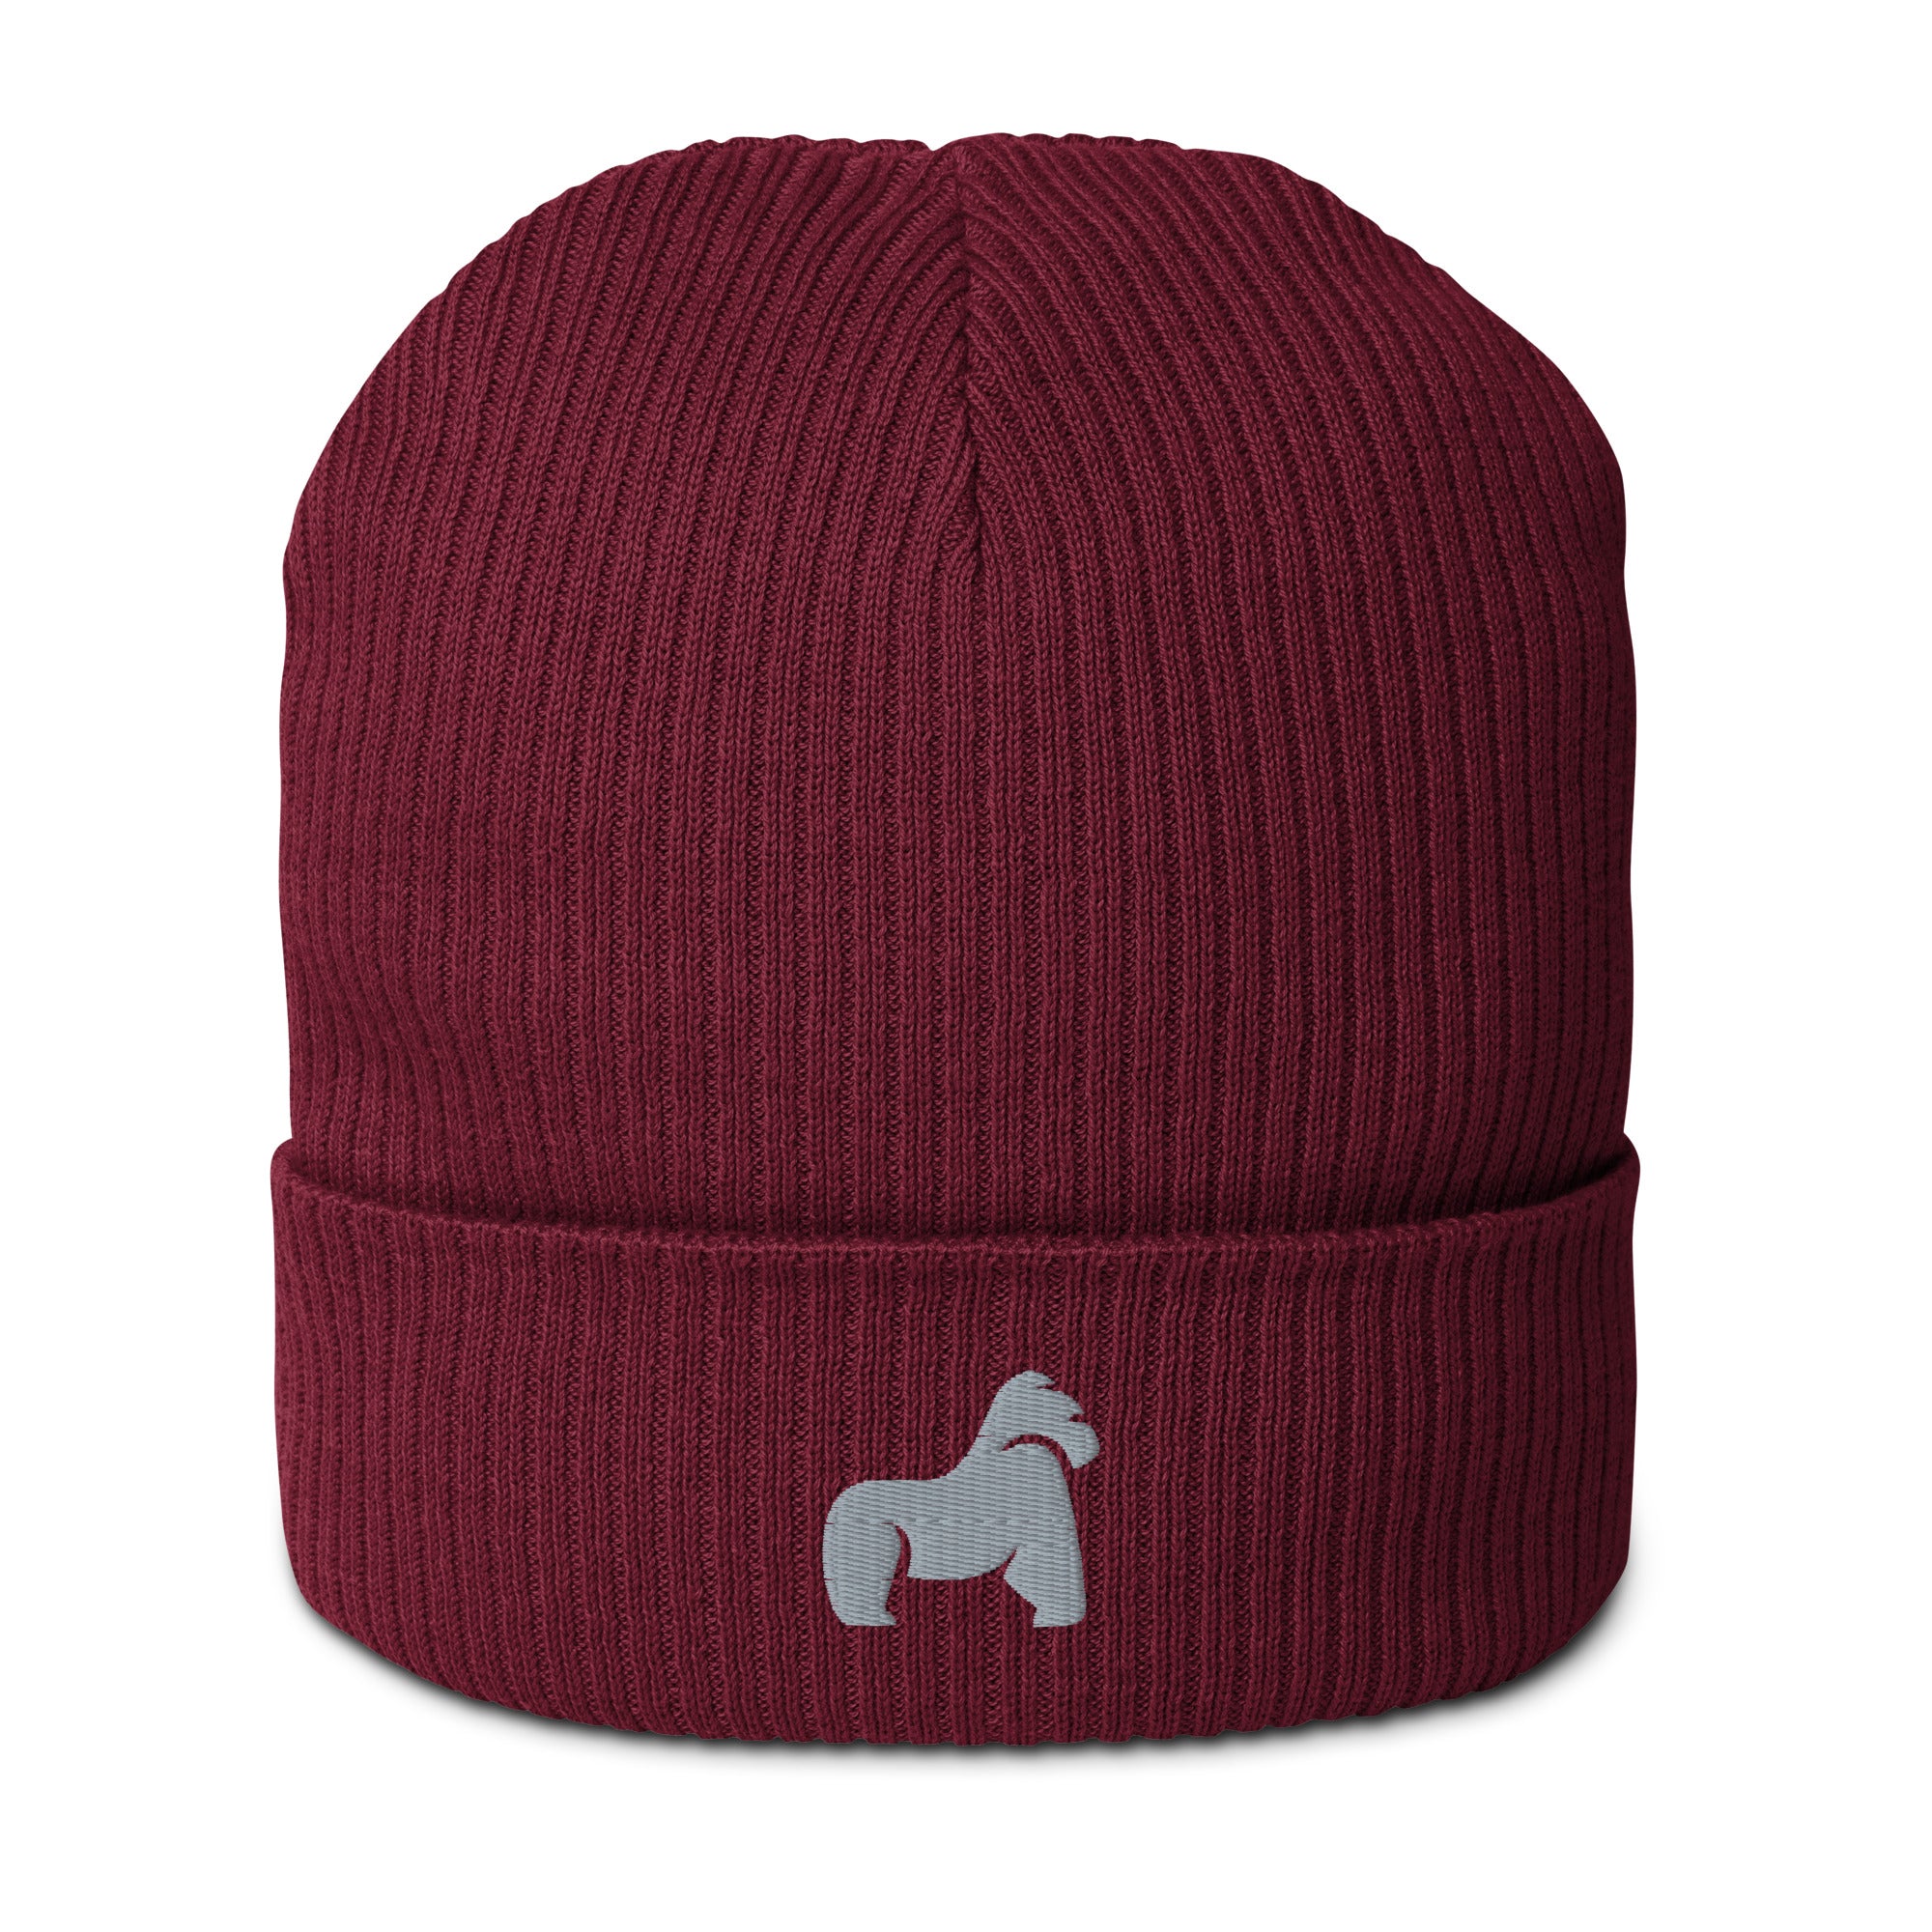 Gorilla Beanie Ribbed hat made from organic cotton